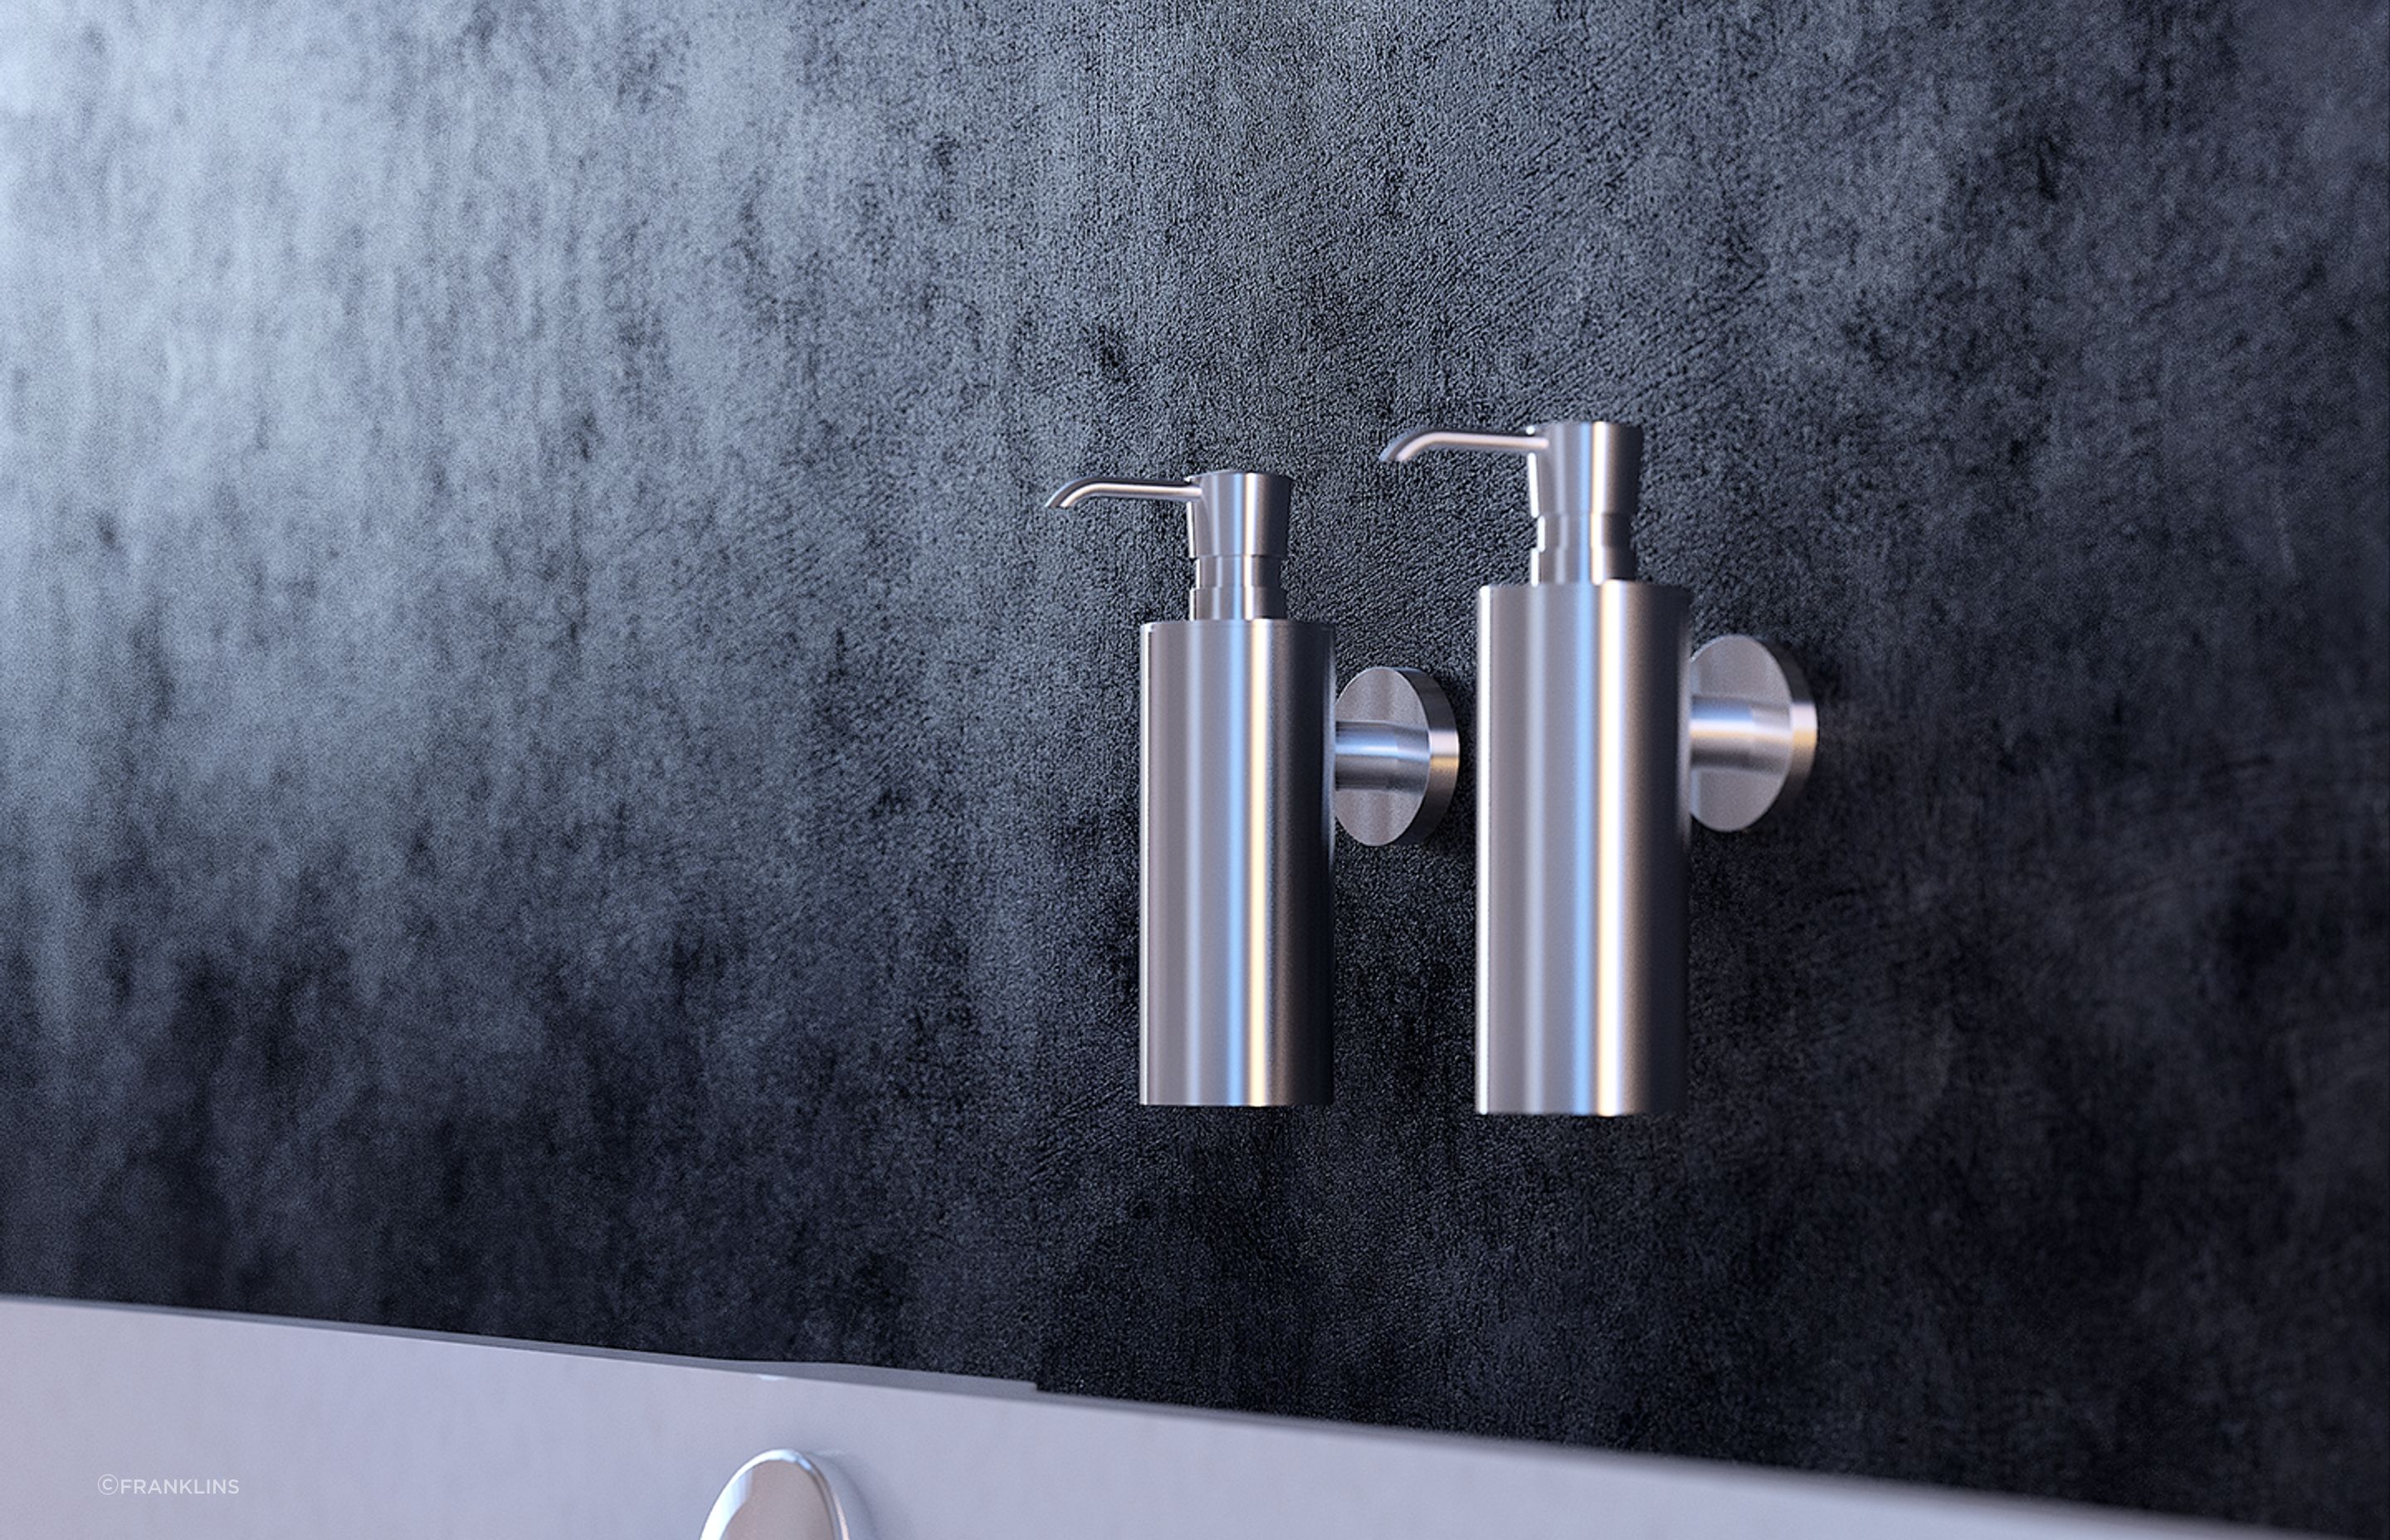 There's no need for unsightly toiletries when you have the Geesa Nemox Stainless Steel Soap Dispensers installed.